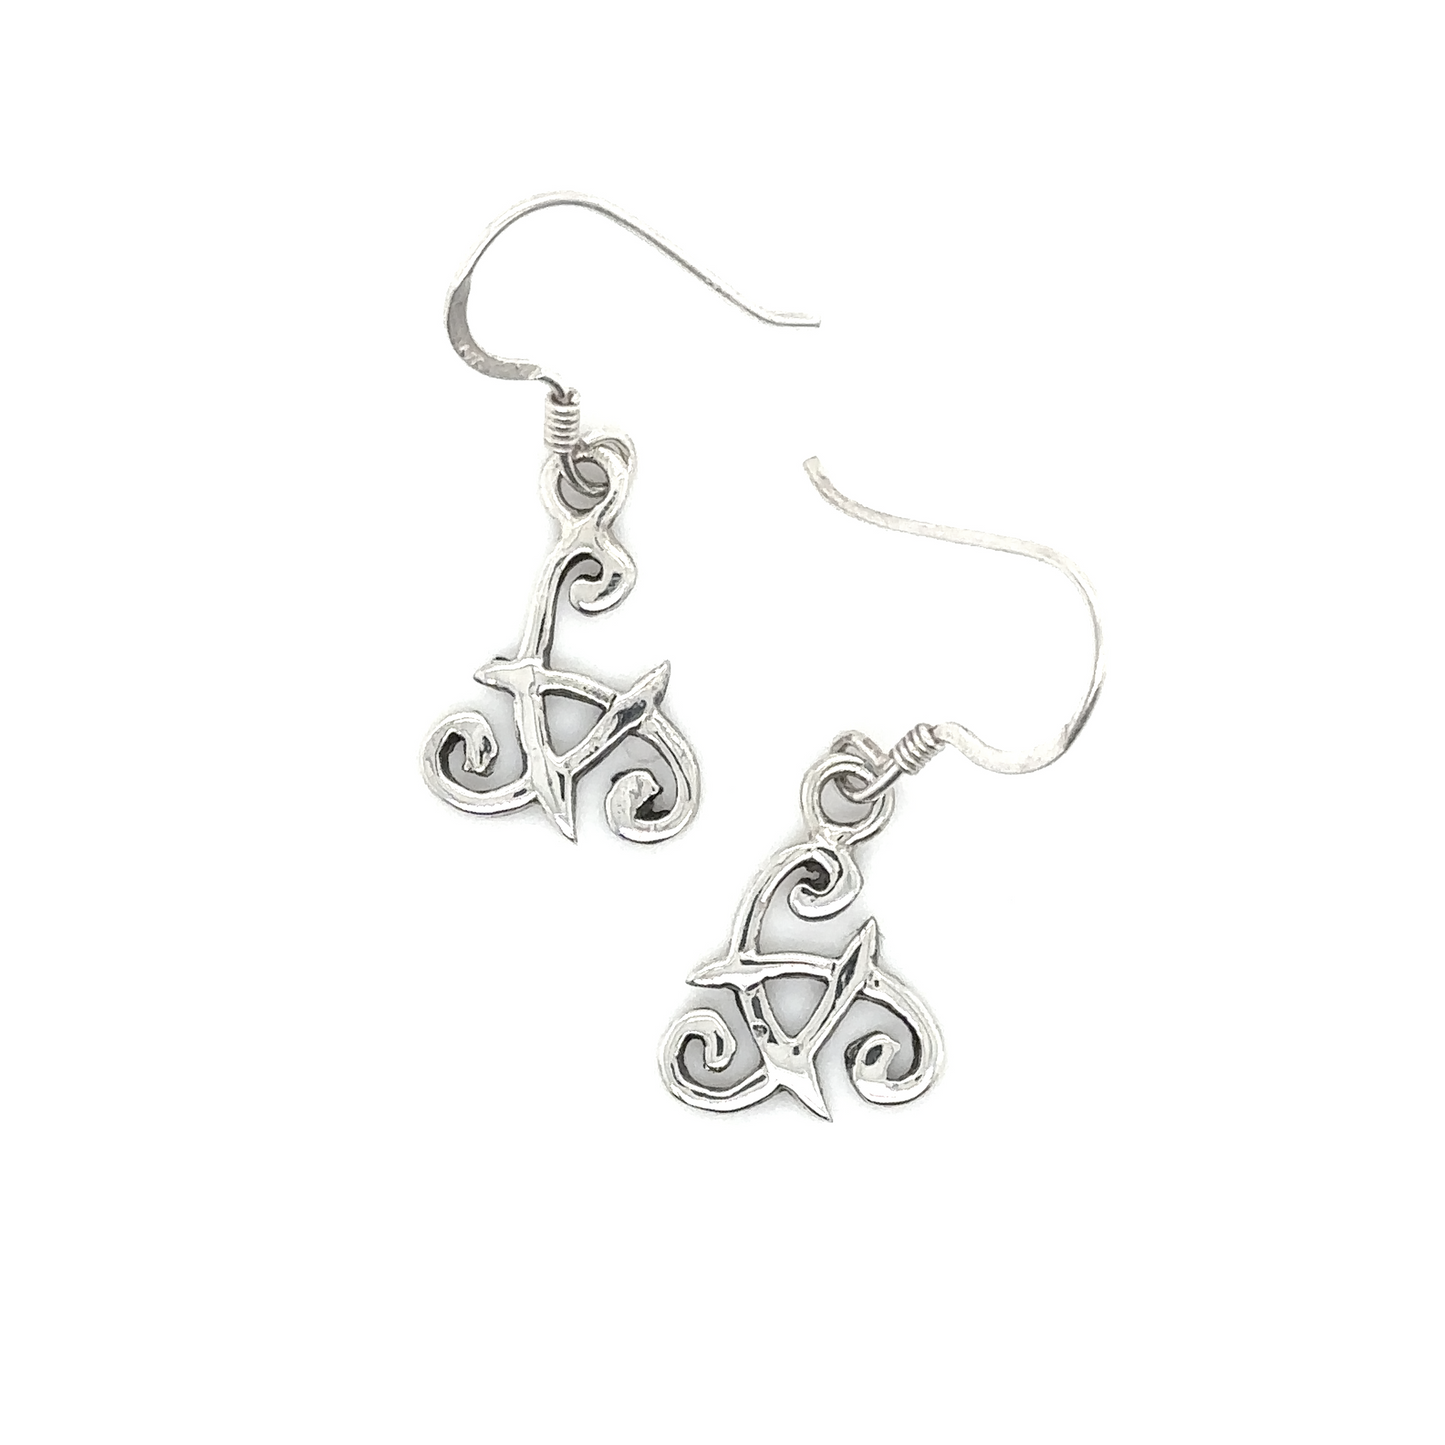 These Super Silver Celtic Triple Spiral Earrings feature an intricate triple spiral design.